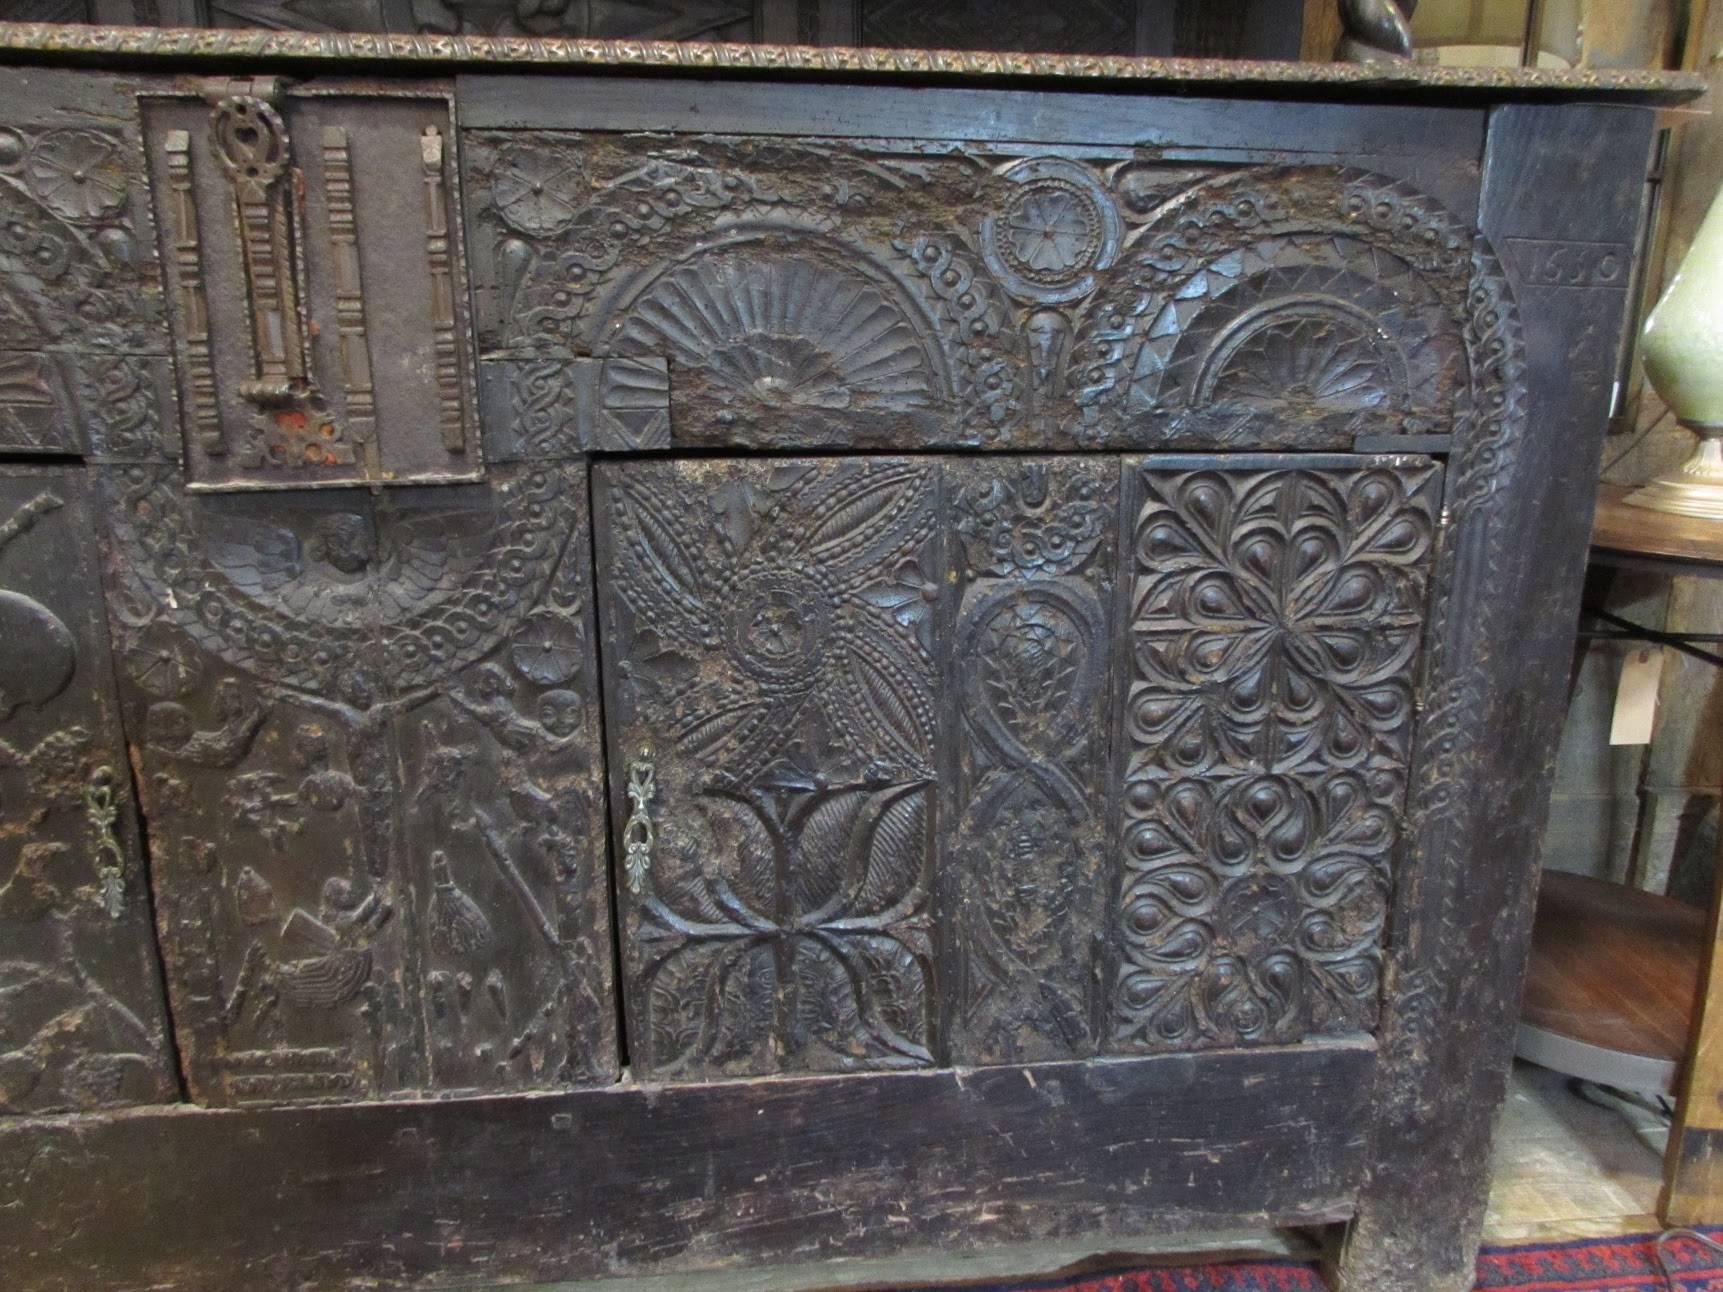 This English sideboard is heavily carved with figural Bishop and rabbit figures. Some original hardware, some replacement.

There are four large doors two on the top and two on the bottom, with fitted shelves. There are odd horizontal door on top